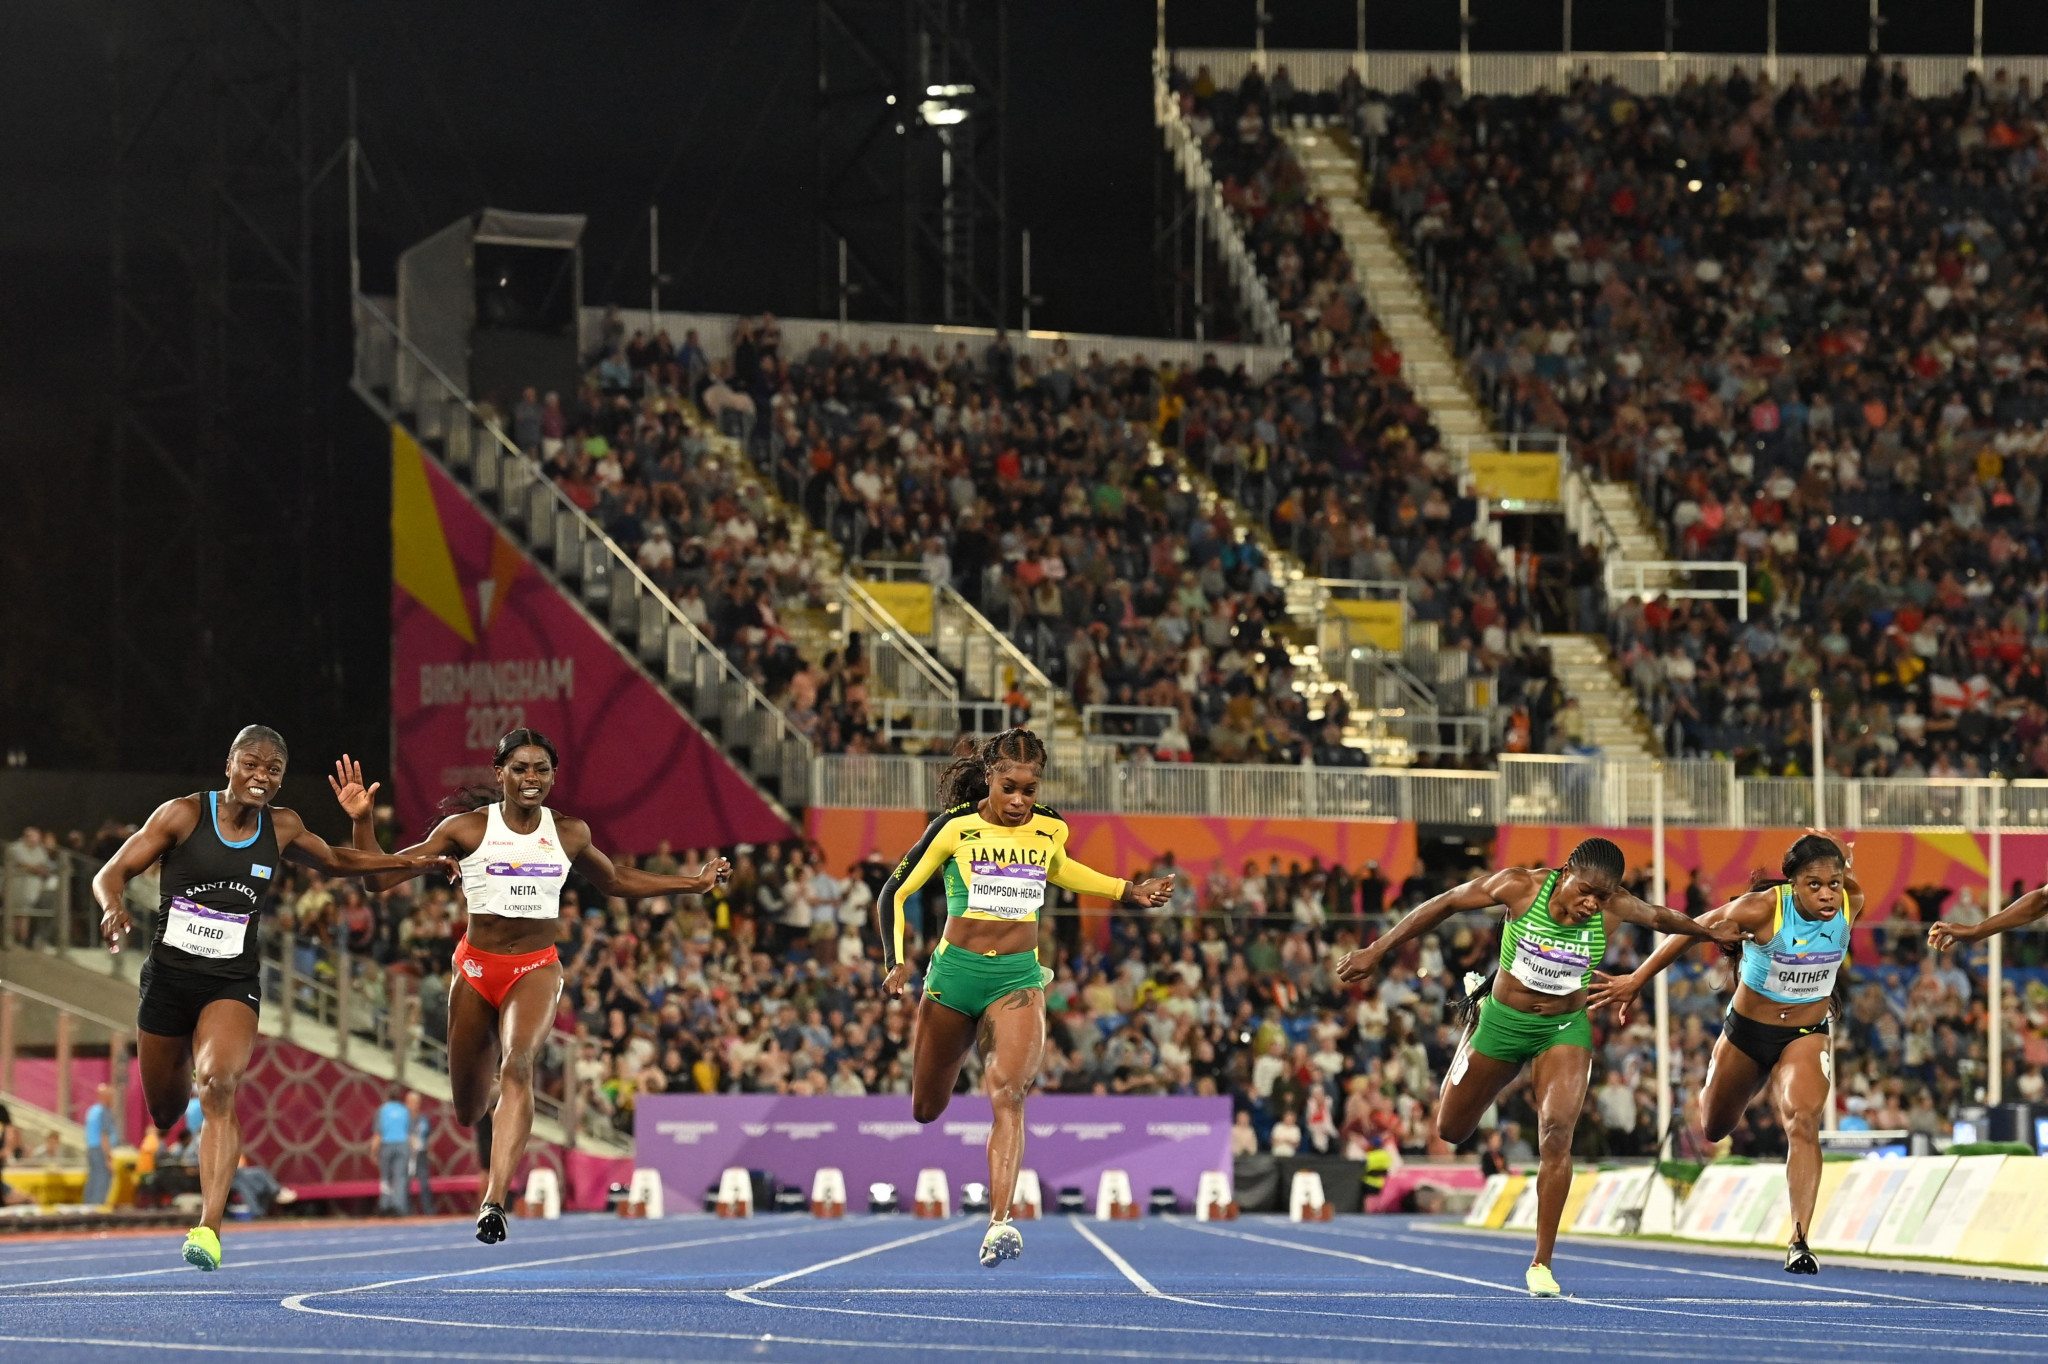 The men's and women's 100m finals were staged back-to-back at the Alexander Stadium yesterday ©Getty Images